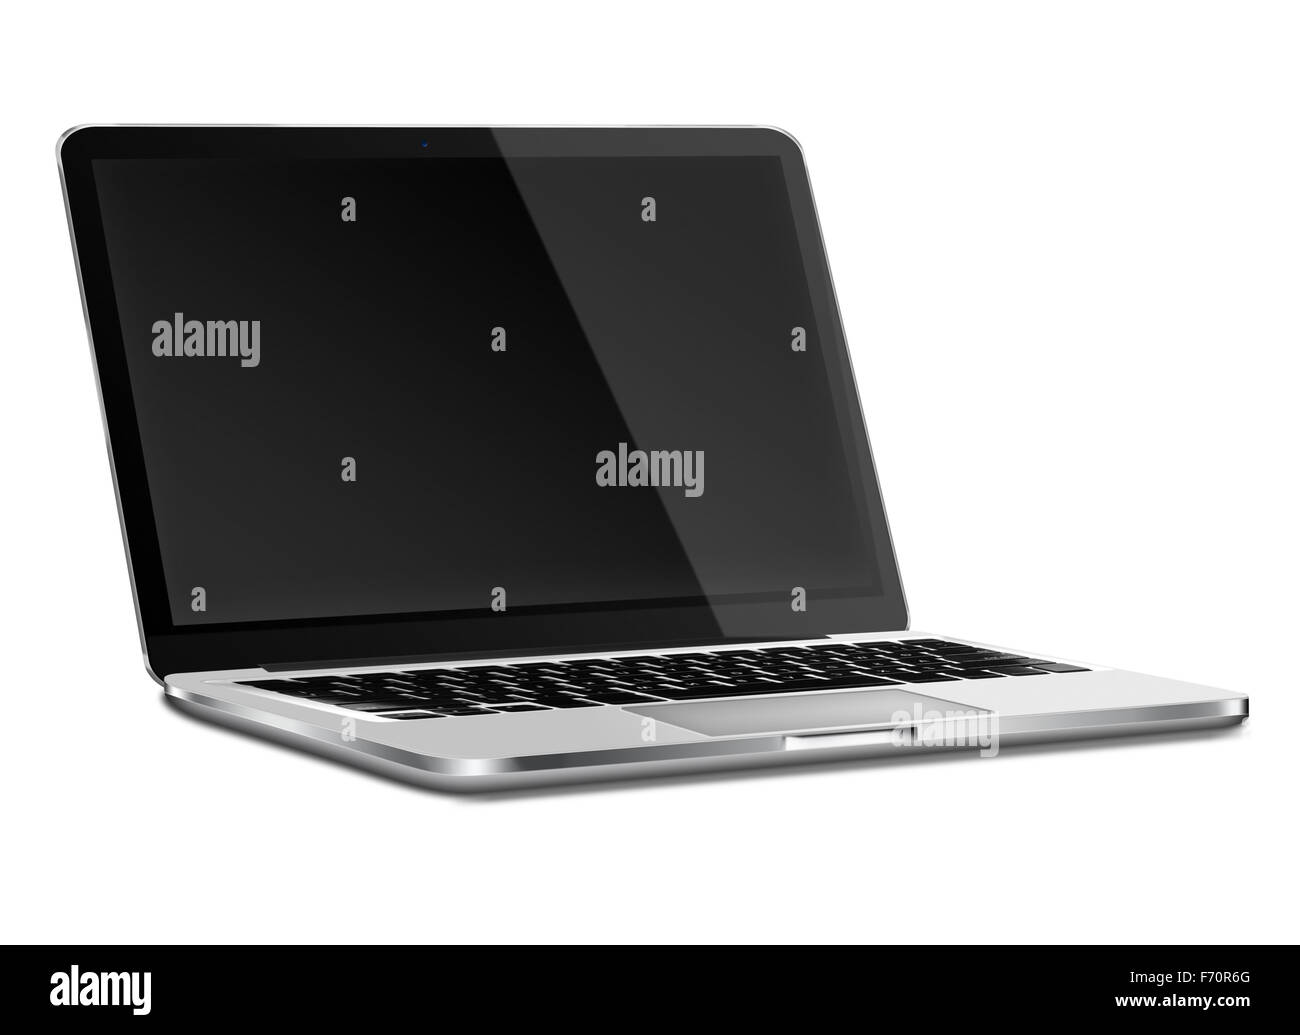 Laptop Black and White Stock Photos & Images - Alamy